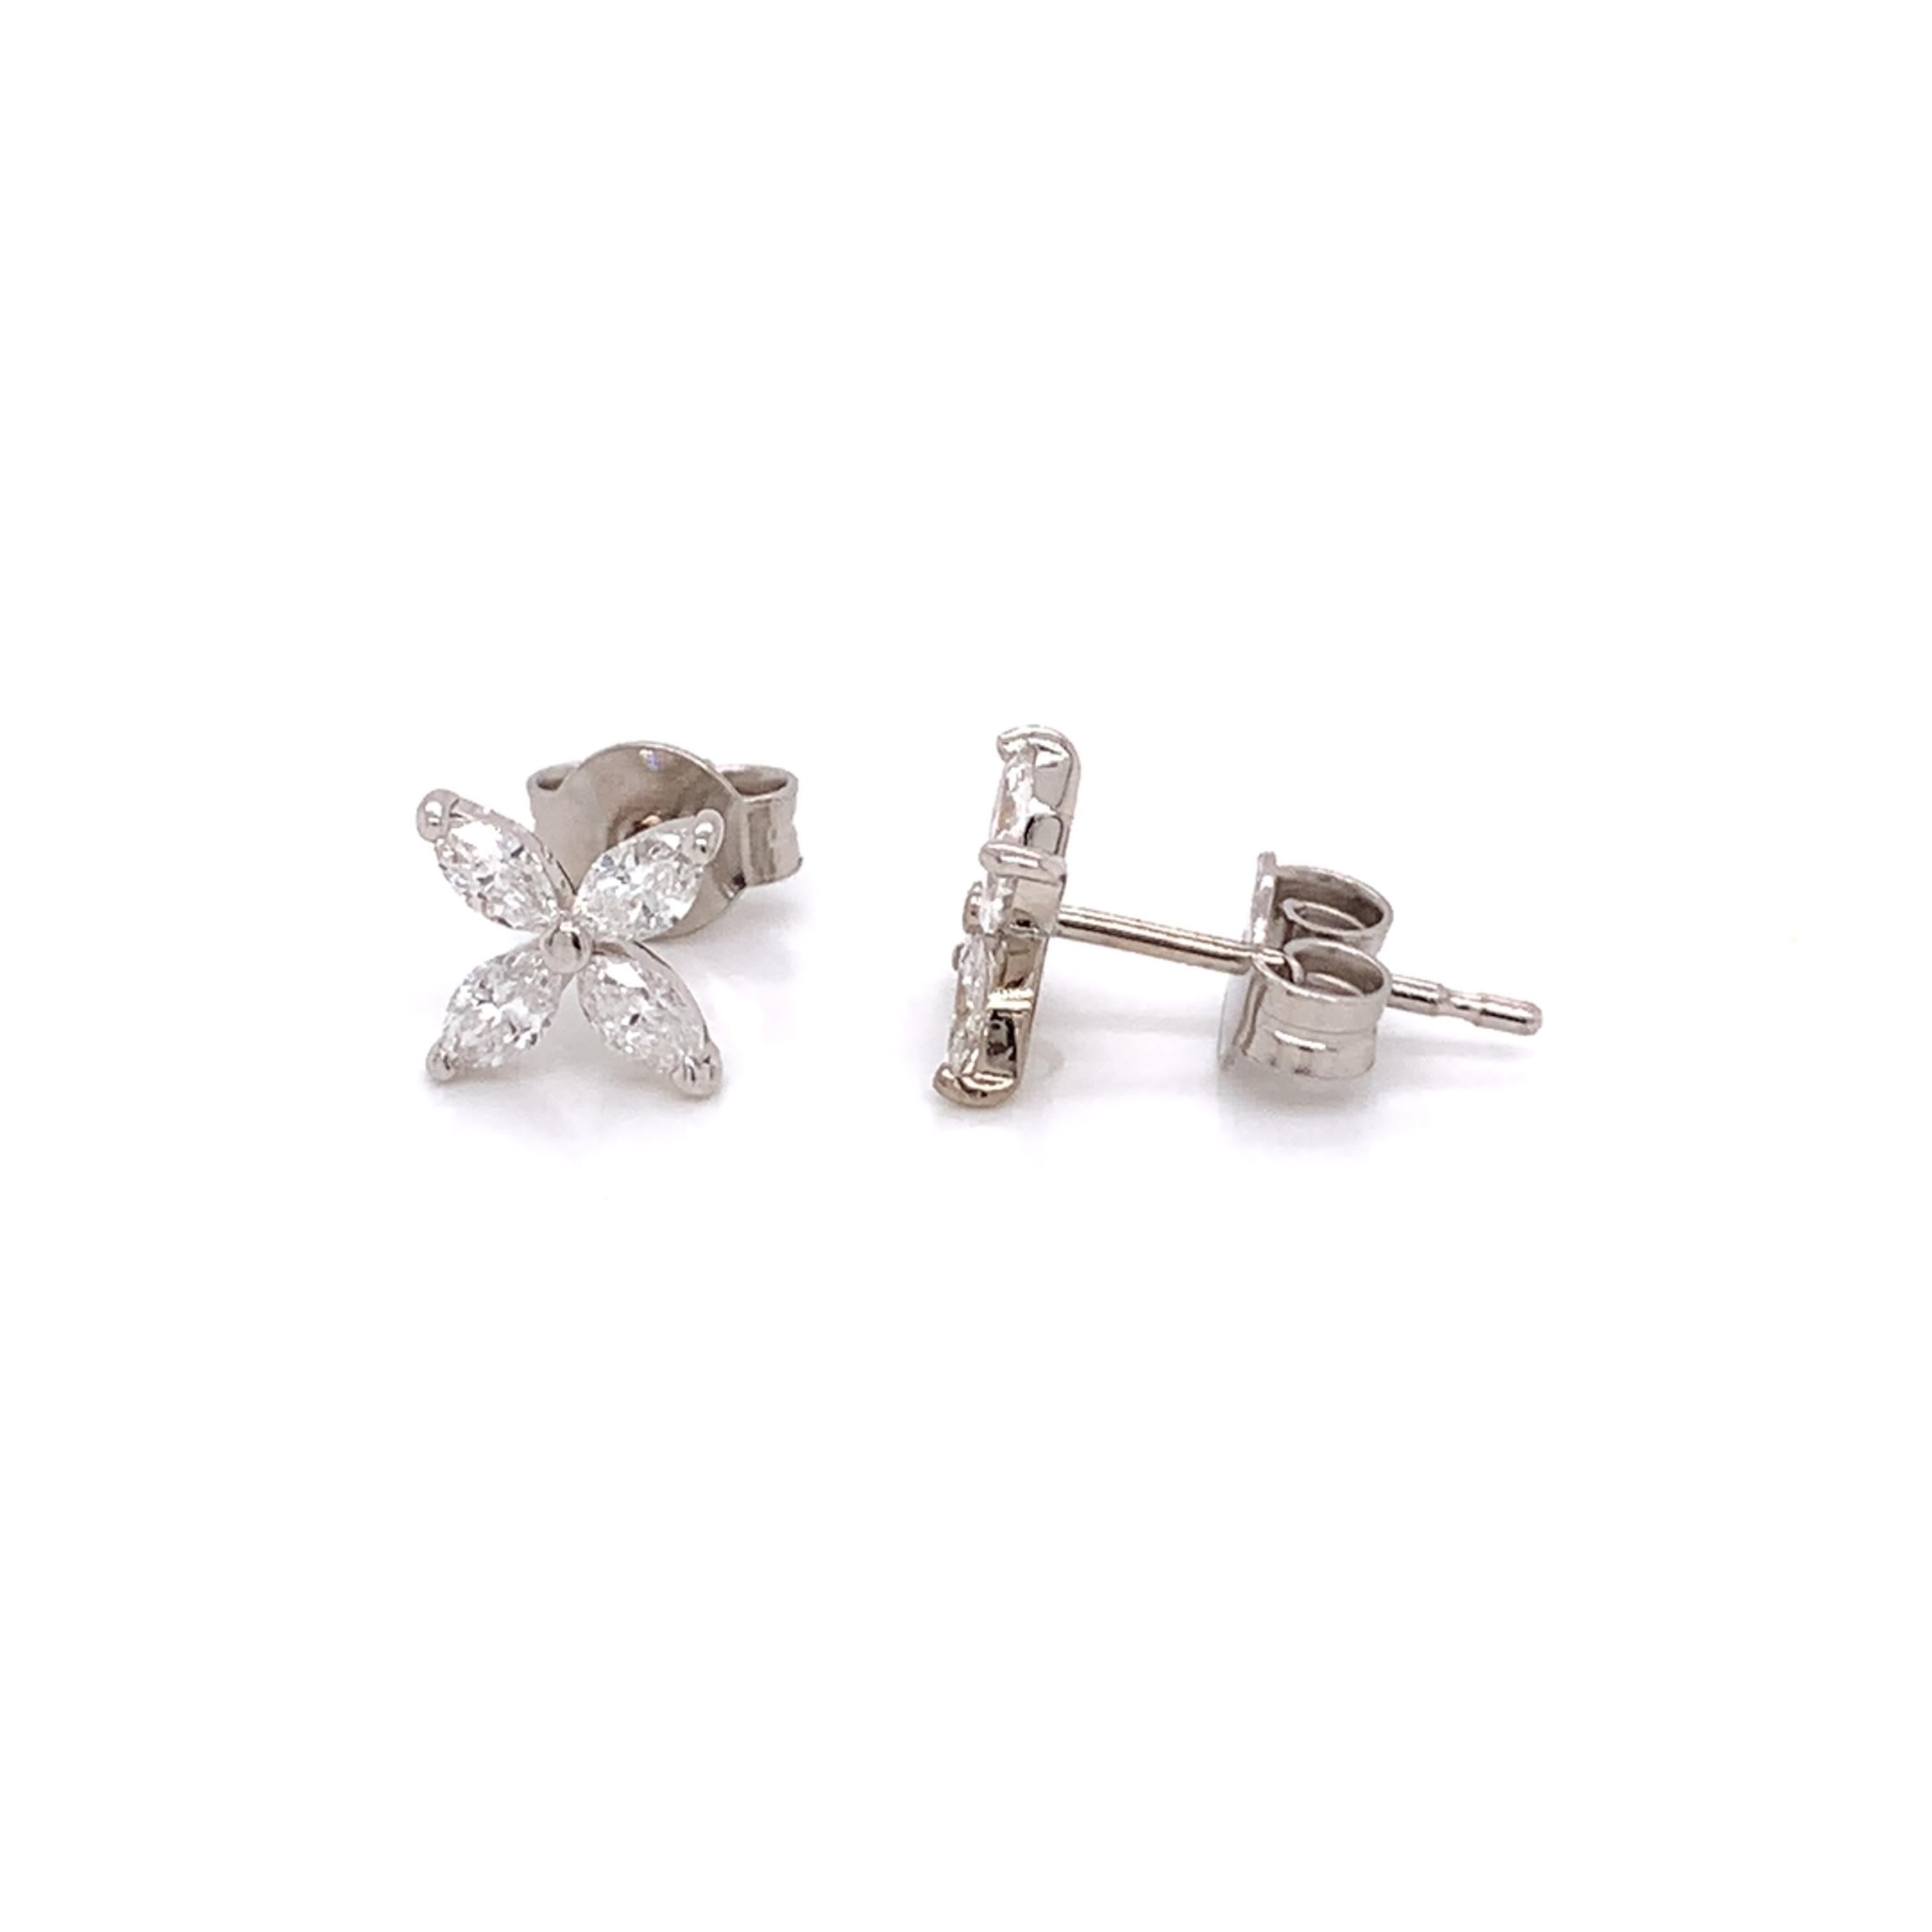 Flower shaped diamond earrings made with real/natural oval shaped diamonds. Diamond Total Weight: 0.50 carats. Diamond Quantity: 8 (oval shaped diamonds). Diamond Color: G-H. Diamond Clarity: SI. Mounted on 18kt white gold push-back setting.